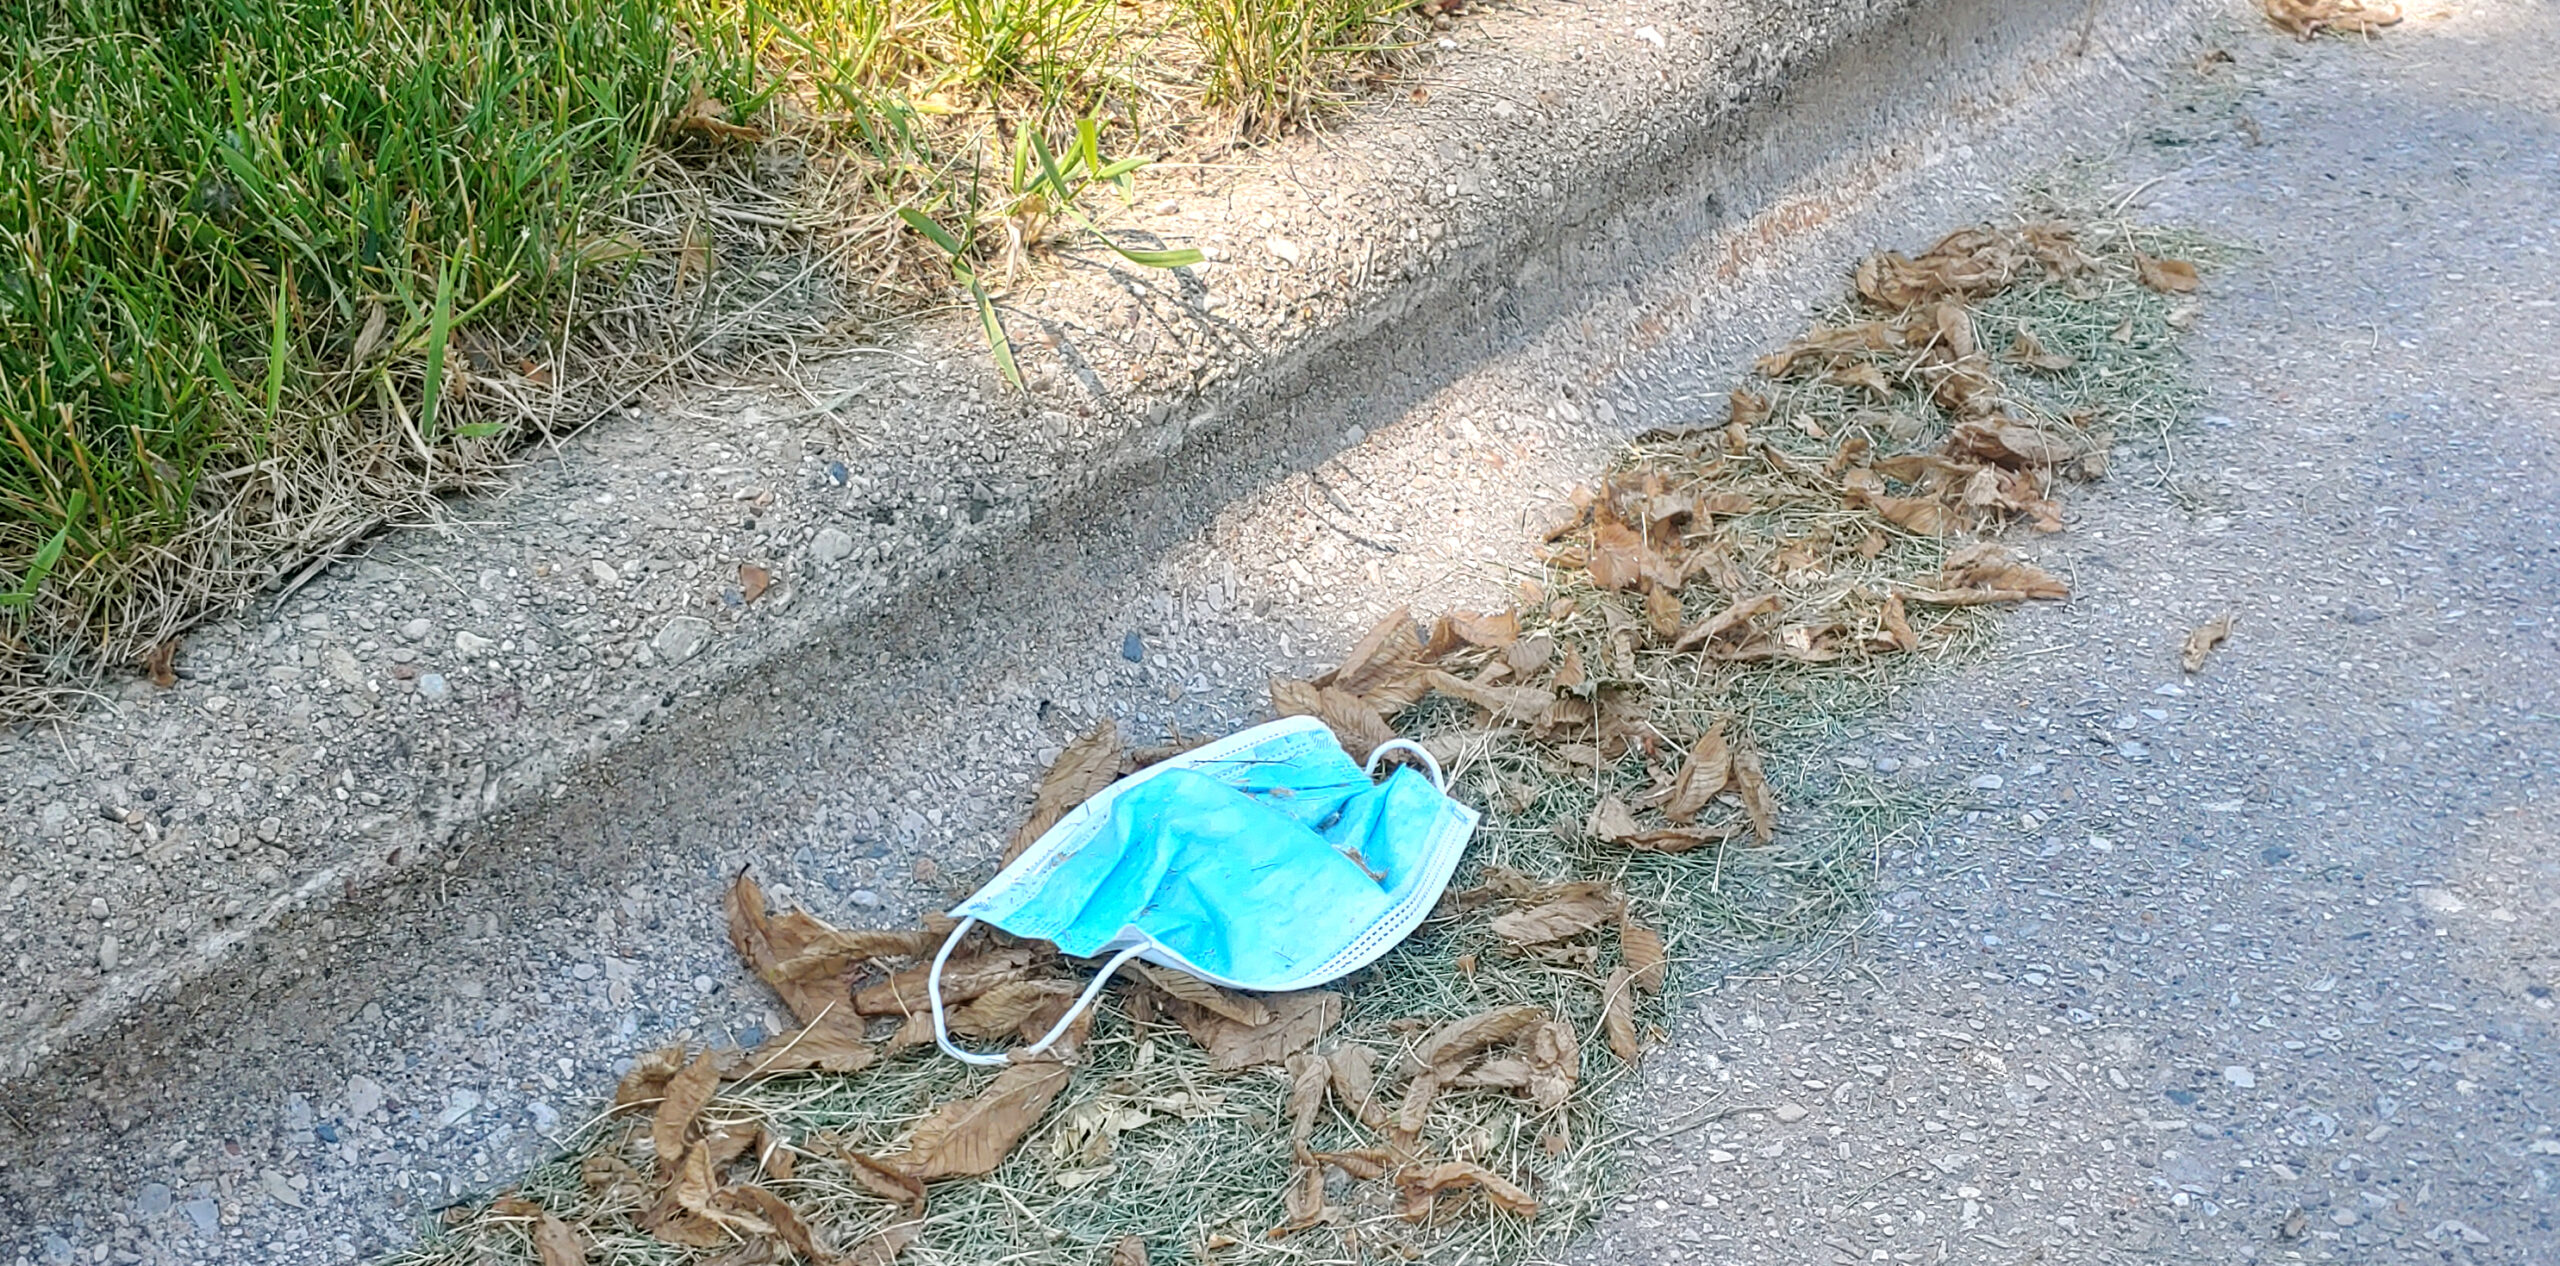 A surgical mask, which are now commonly used to protect the wearer from the coronavirus, discarded on a northside Madison street.